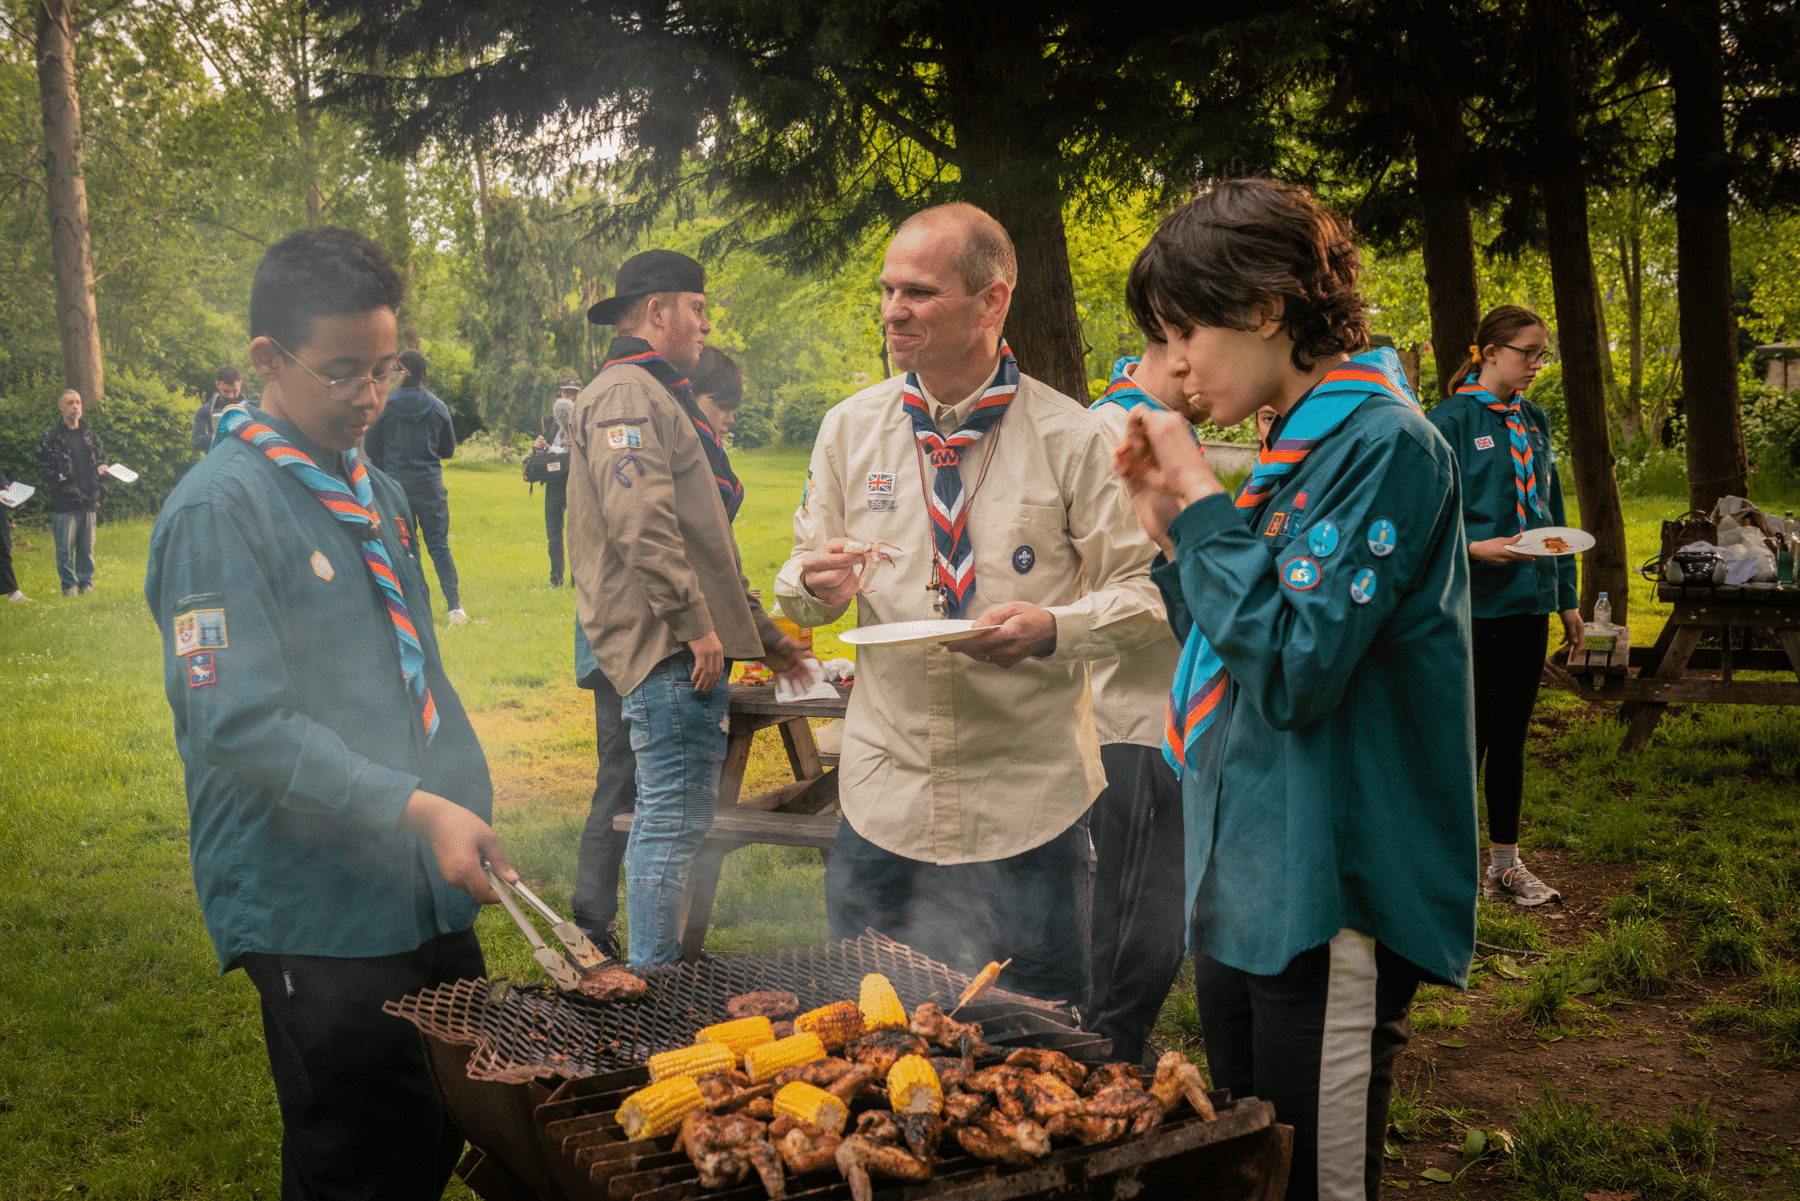 Two Scouts and their leader are at a big Scout event. They are stood around a BBQ eating, with the leader in the middle. There is lots cooking on the BBQ, including sausages and corn on the cob. One Scout is moving food around using tongs and the leader is smiling at him, looking very proud.